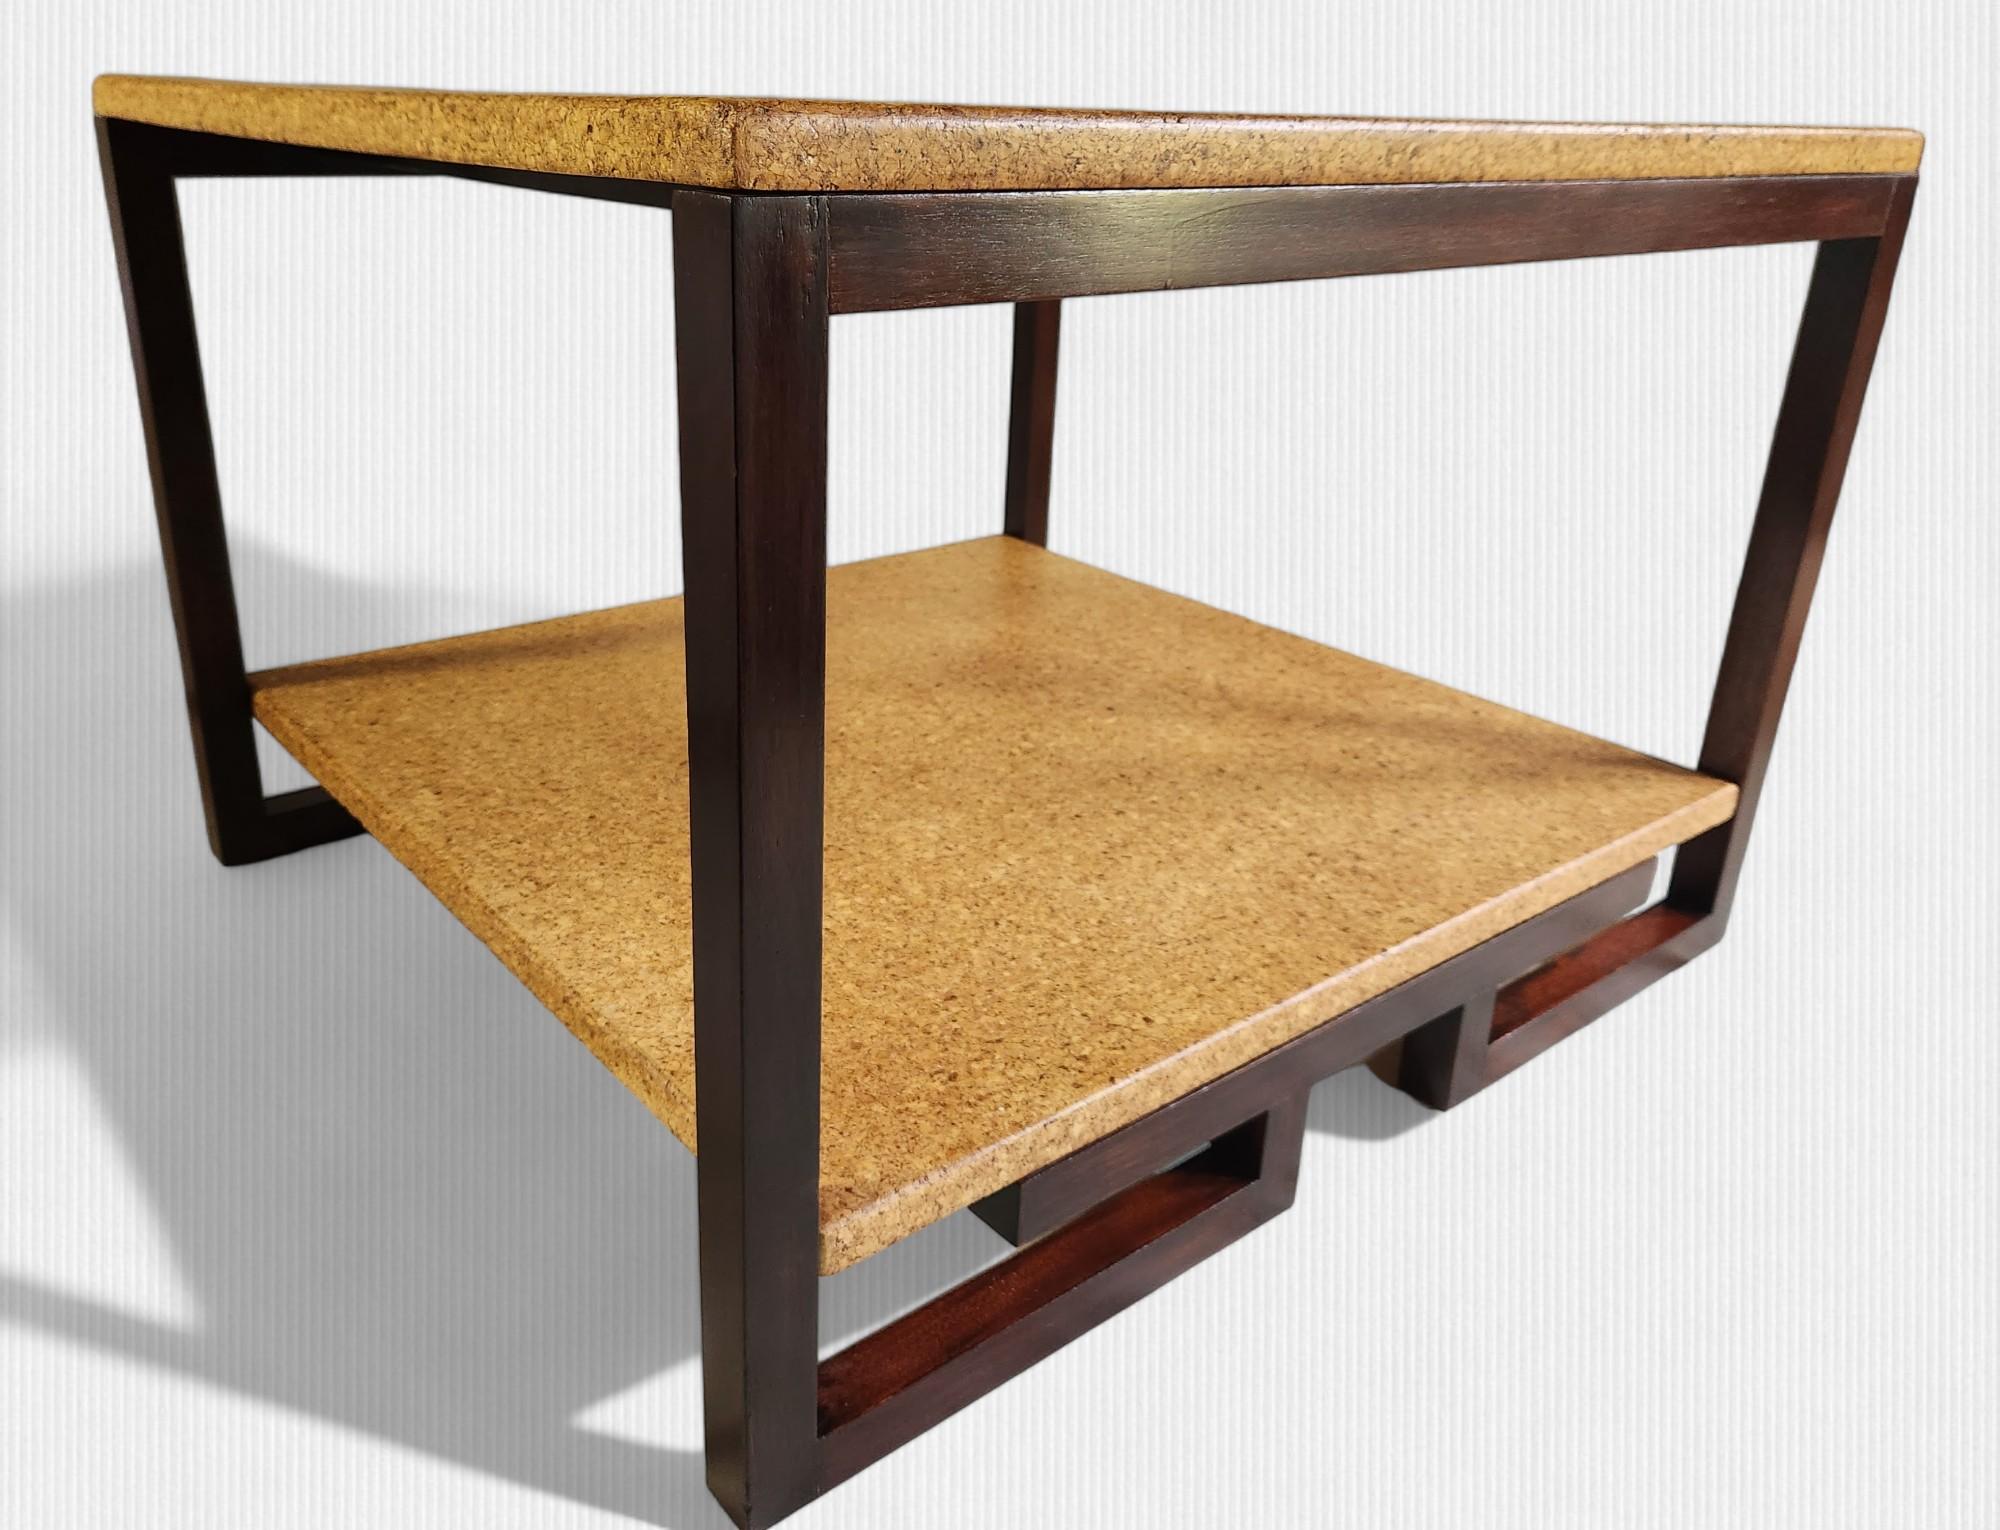 Mid-Century Modern Paul Frankl Mahogany Coffee Table with Cork Tops Johnson Furniture c. 1940s/50s For Sale